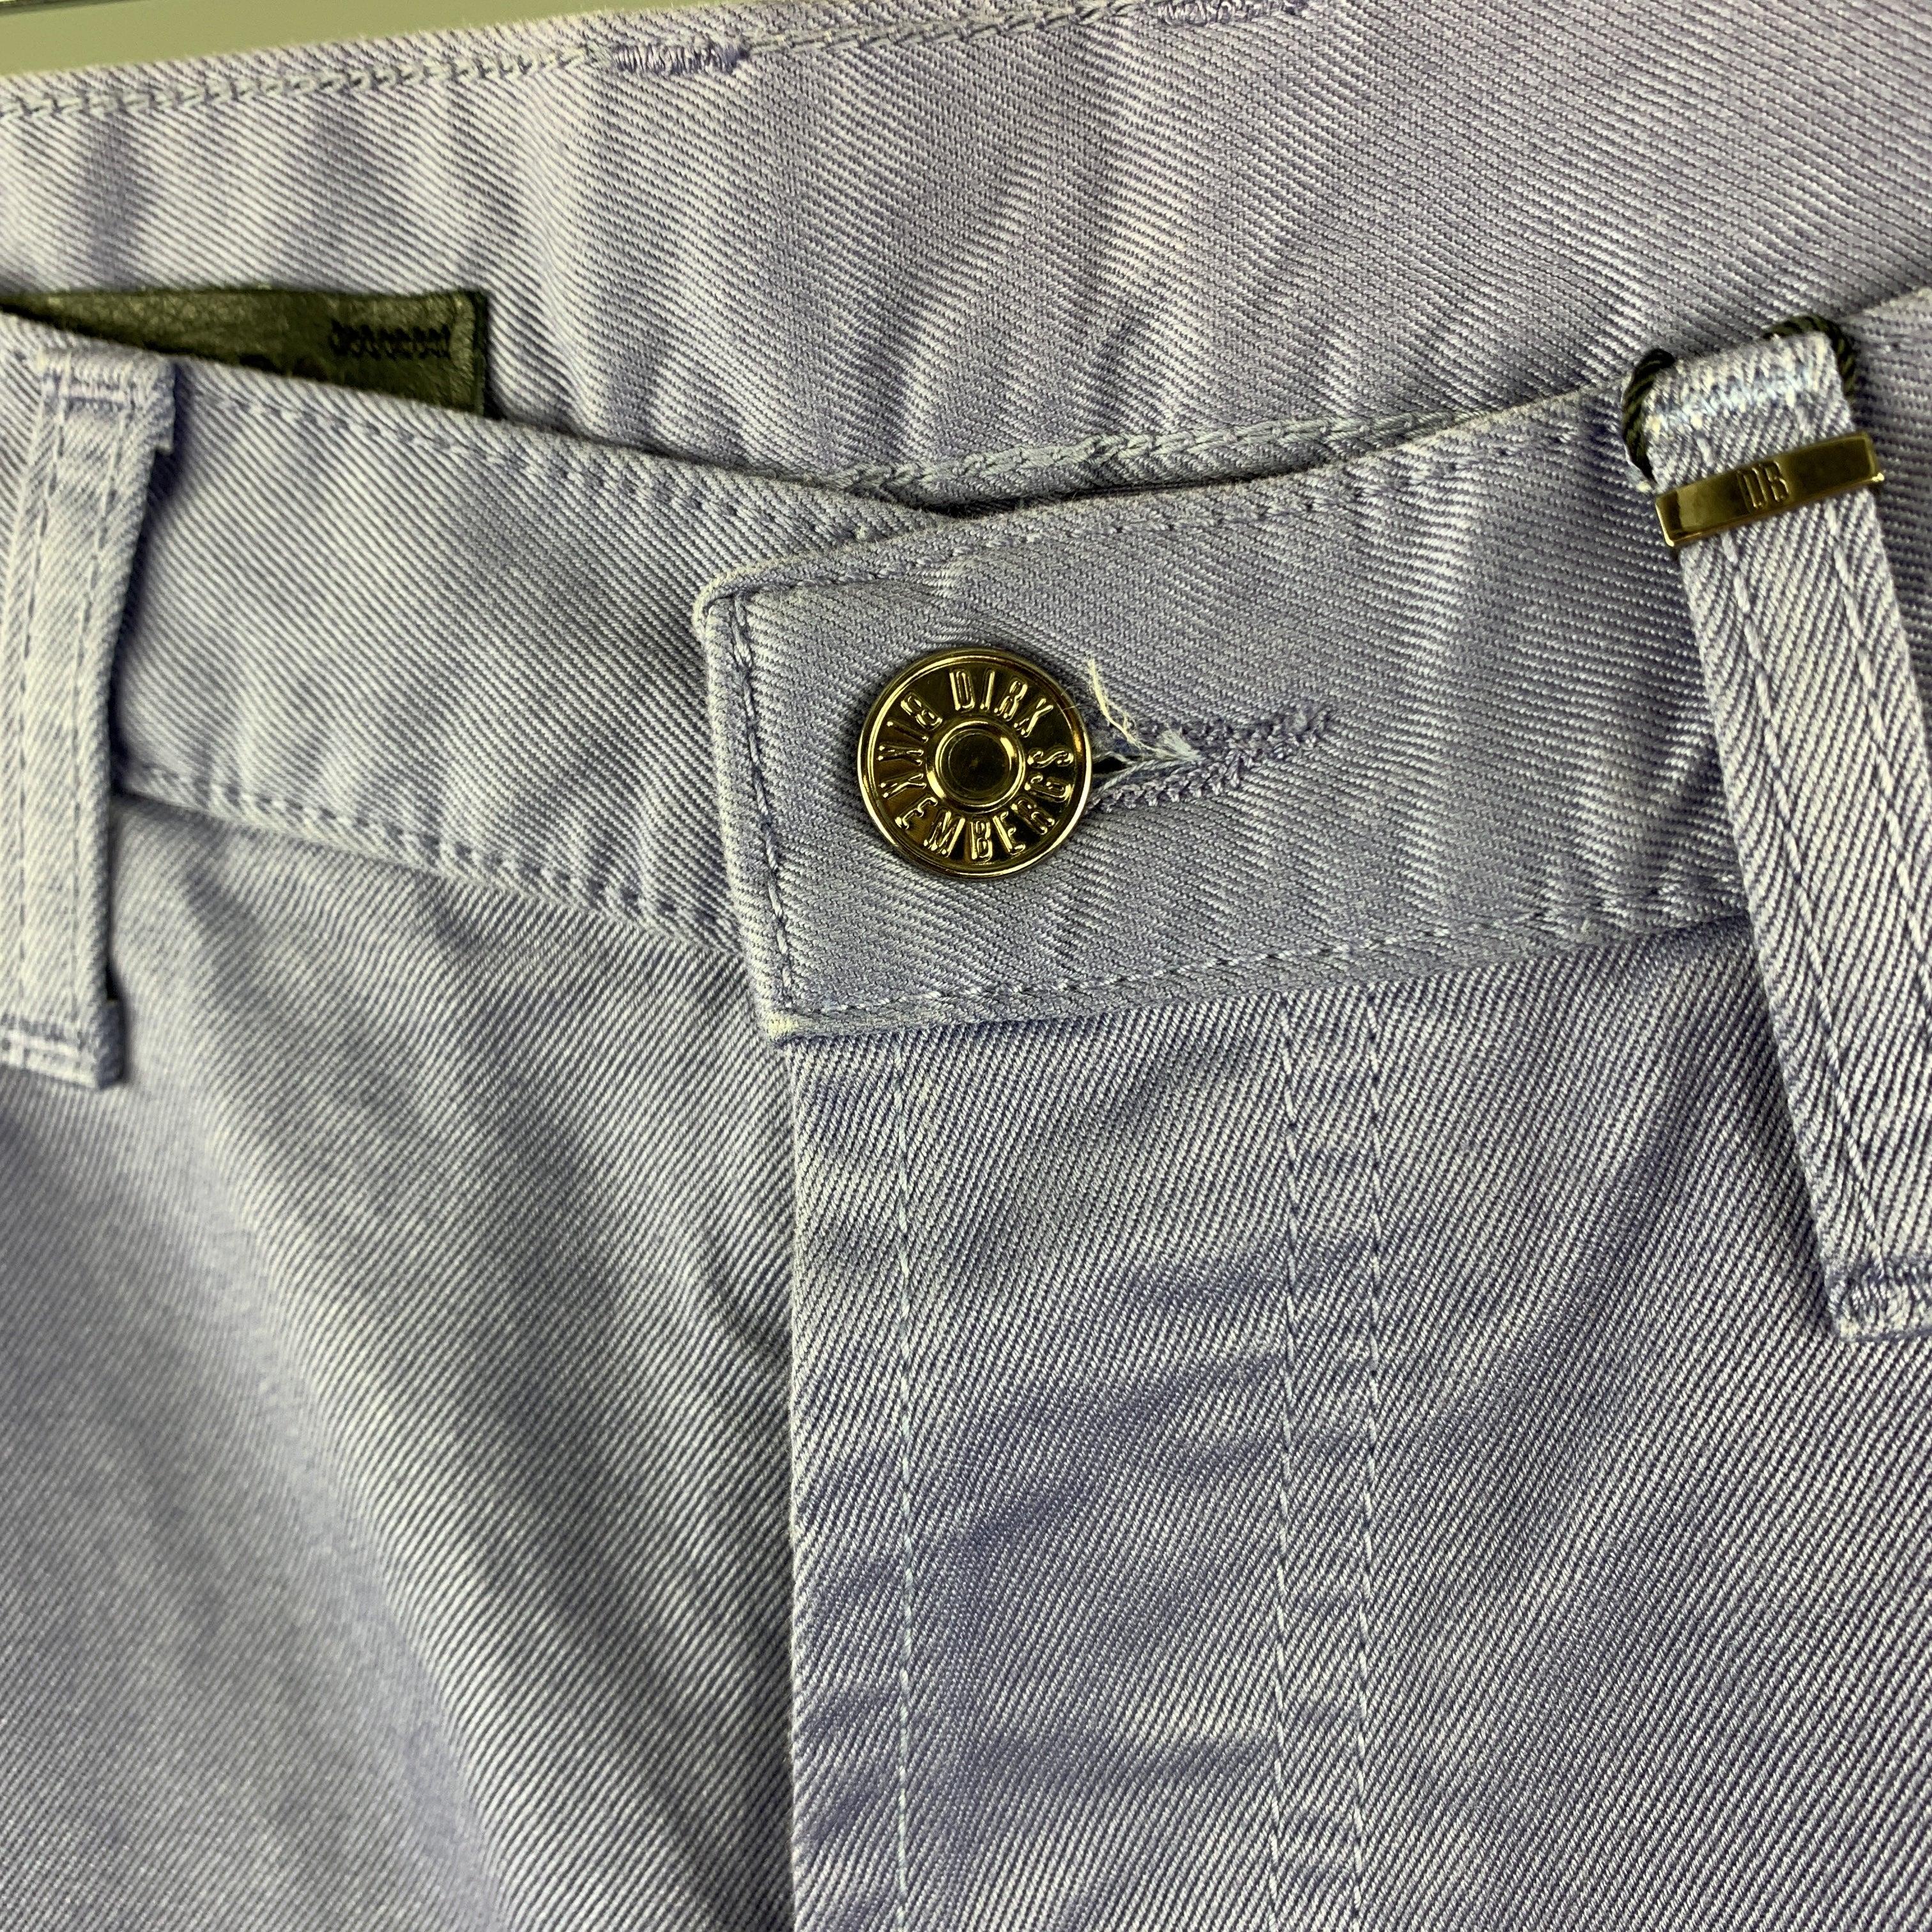 DIRK BIKKEMBERGS Size 30 Lavender Purple Double Seam Jeans In Excellent Condition For Sale In San Francisco, CA